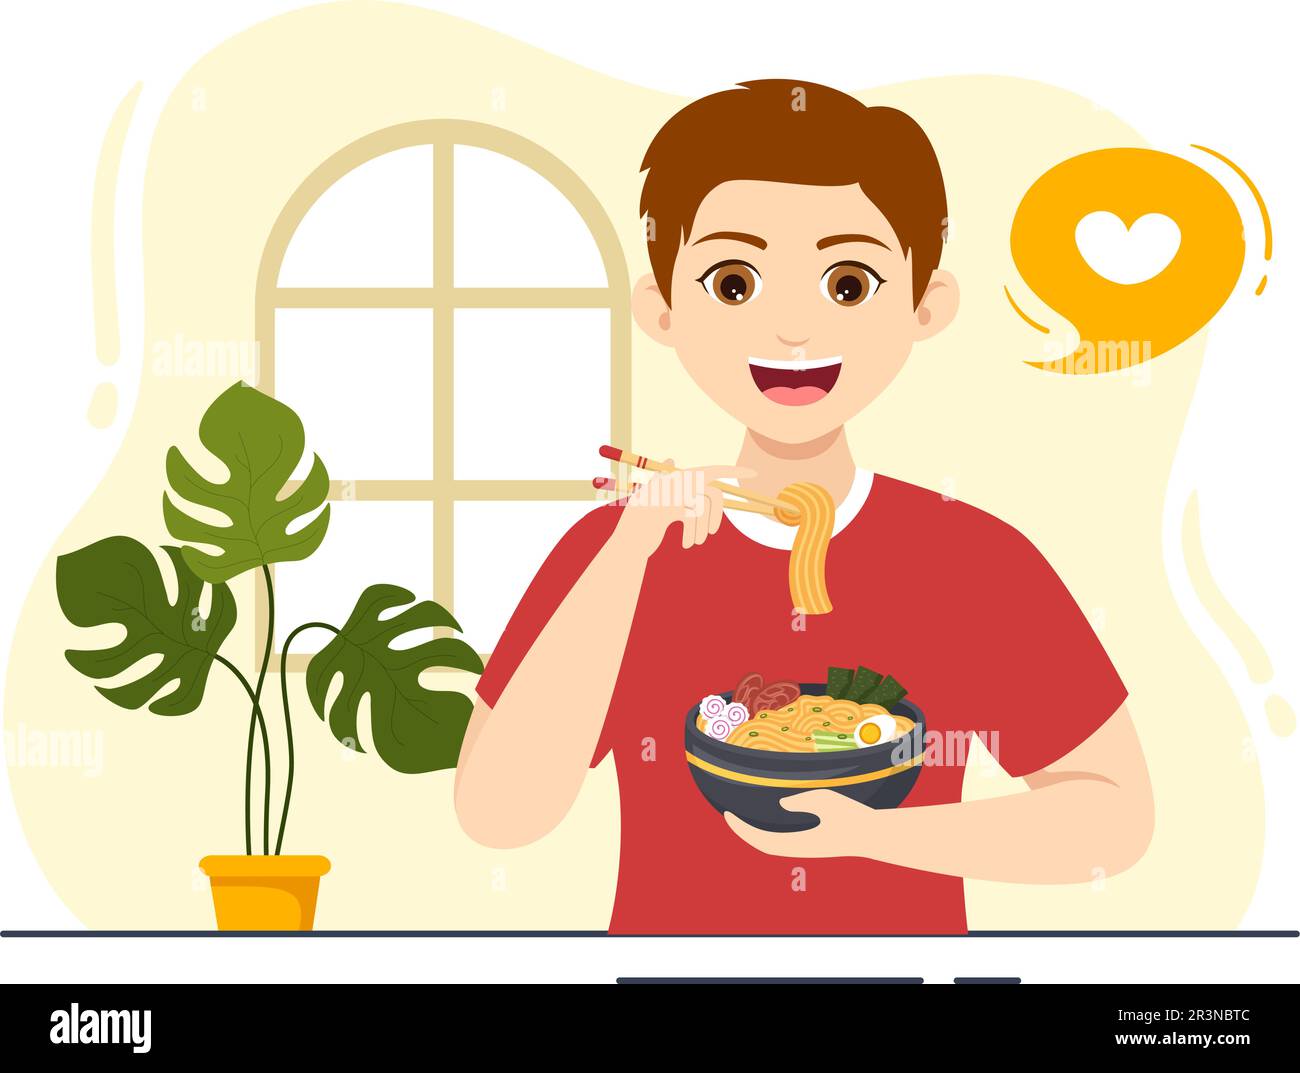 Ramen Vector Illustration of Japanese Food with Noodle, Chopsticks, Miso Soup, Egg lessed and Grilled Nori in Flat Cartoon Hand Drawed Templates Illustrazione Vettoriale